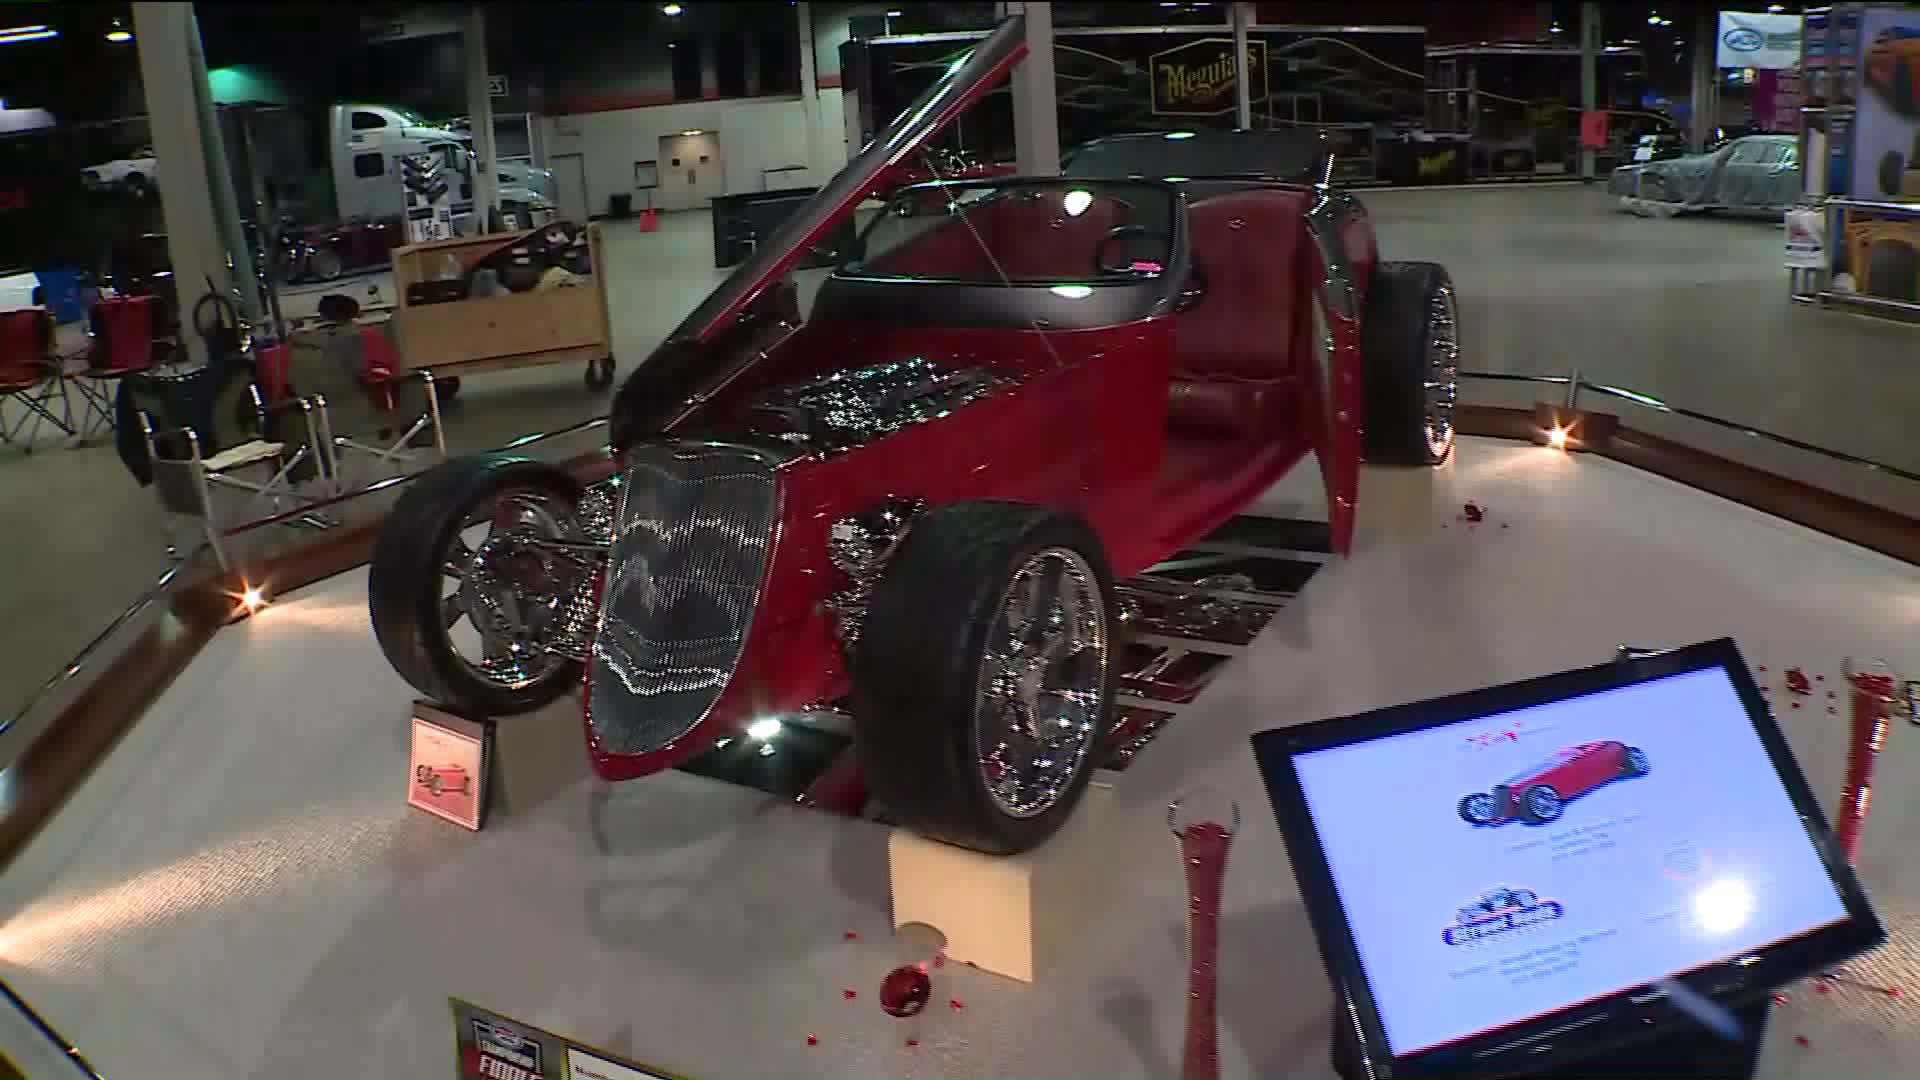 Around Town checks out the cars at the 57th Annual World of Wheels